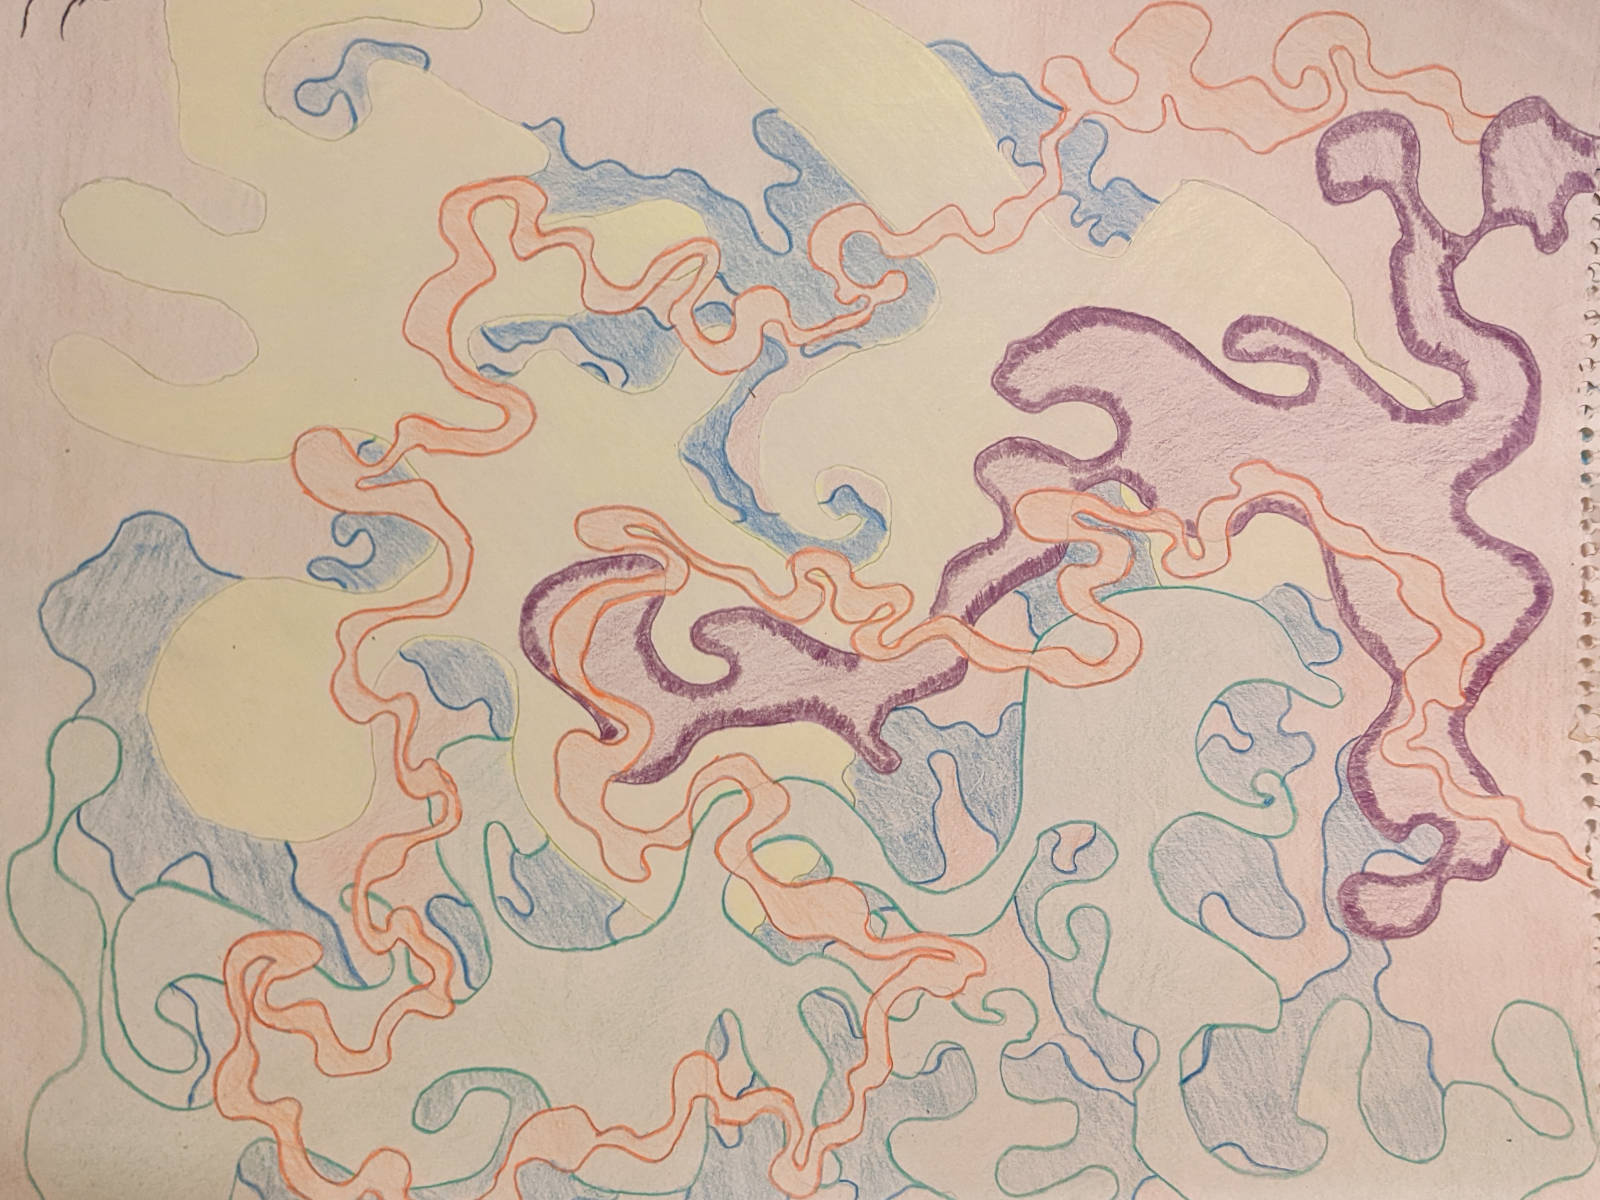 Fluid-like blobs of color across a page.